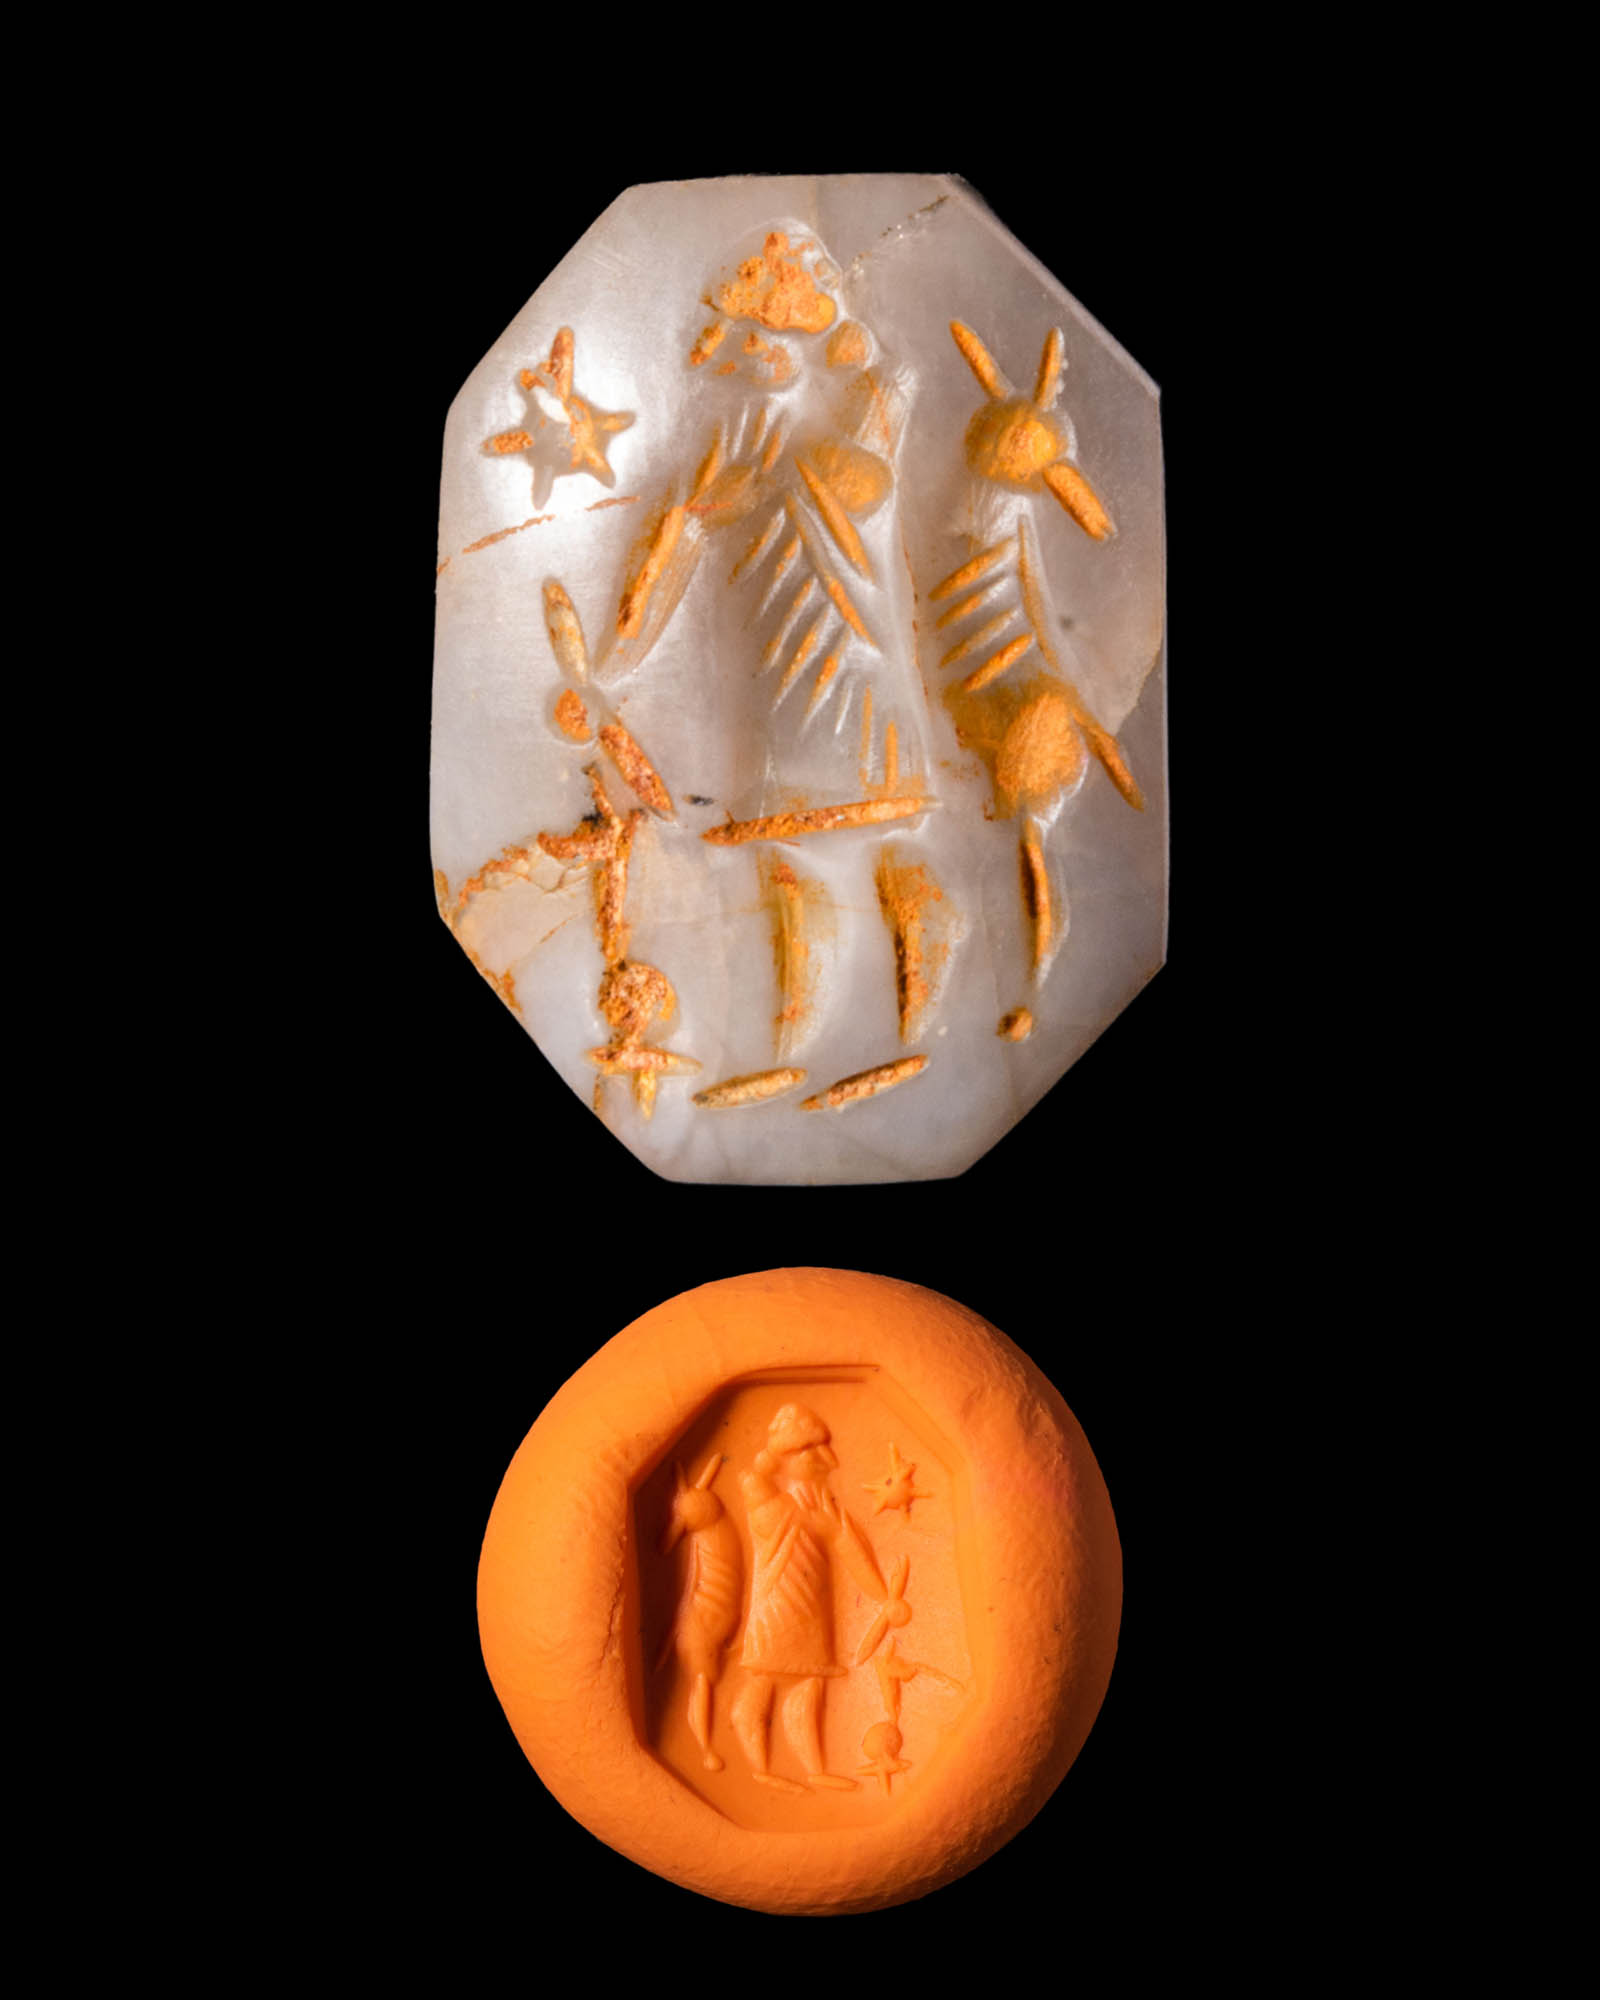 NEO - BABYLONIAN STAMP SEAL DEPICTING A STANDING GOD WITH A HORNED TIARA